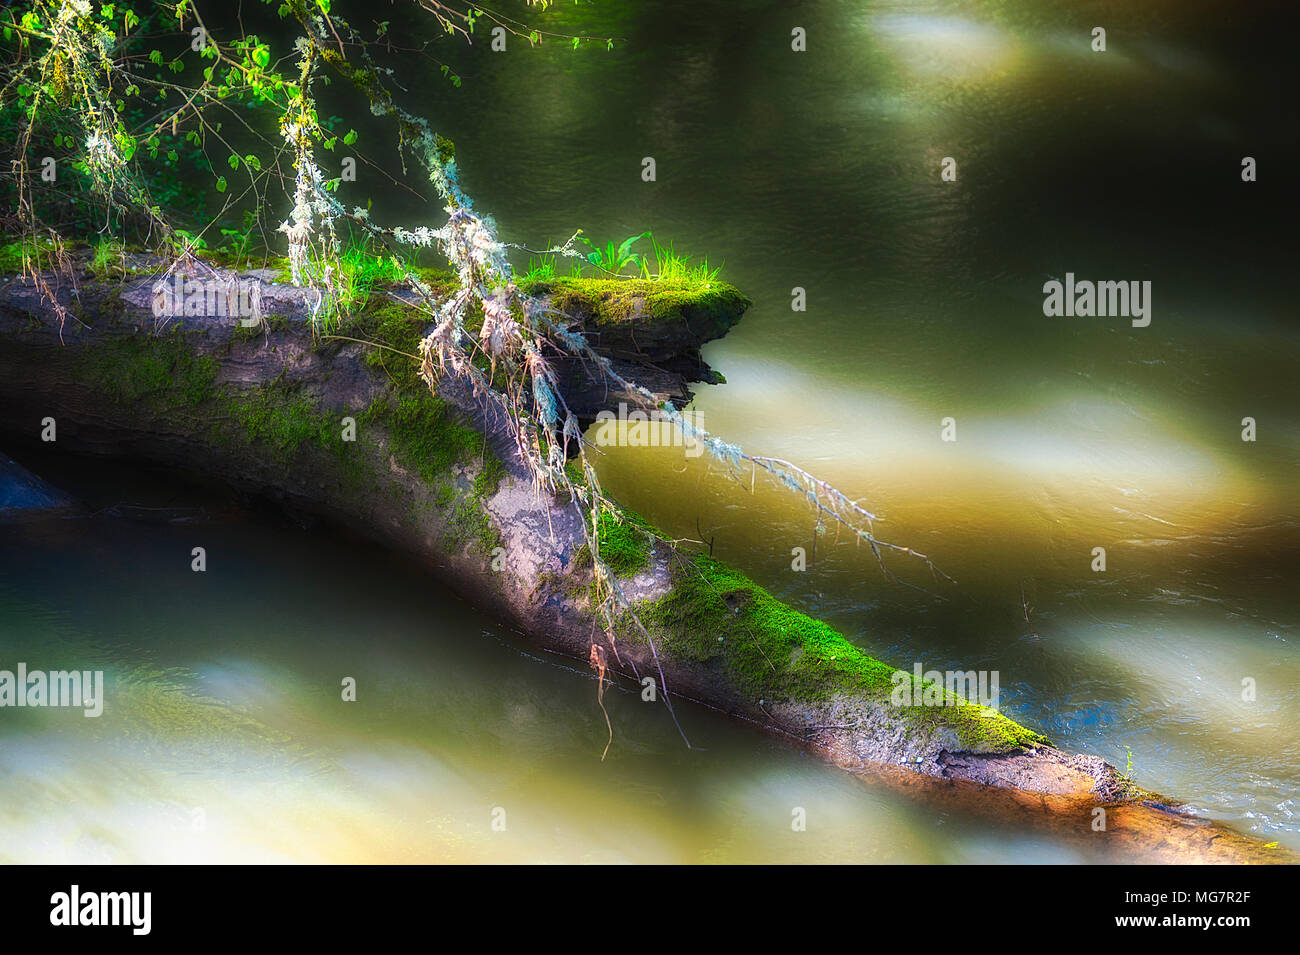 Moss covered log in a creek.  Soft subtle colors of green enhances this beautiful scene.  A quiet refreshing spot for meditating. Stock Photo